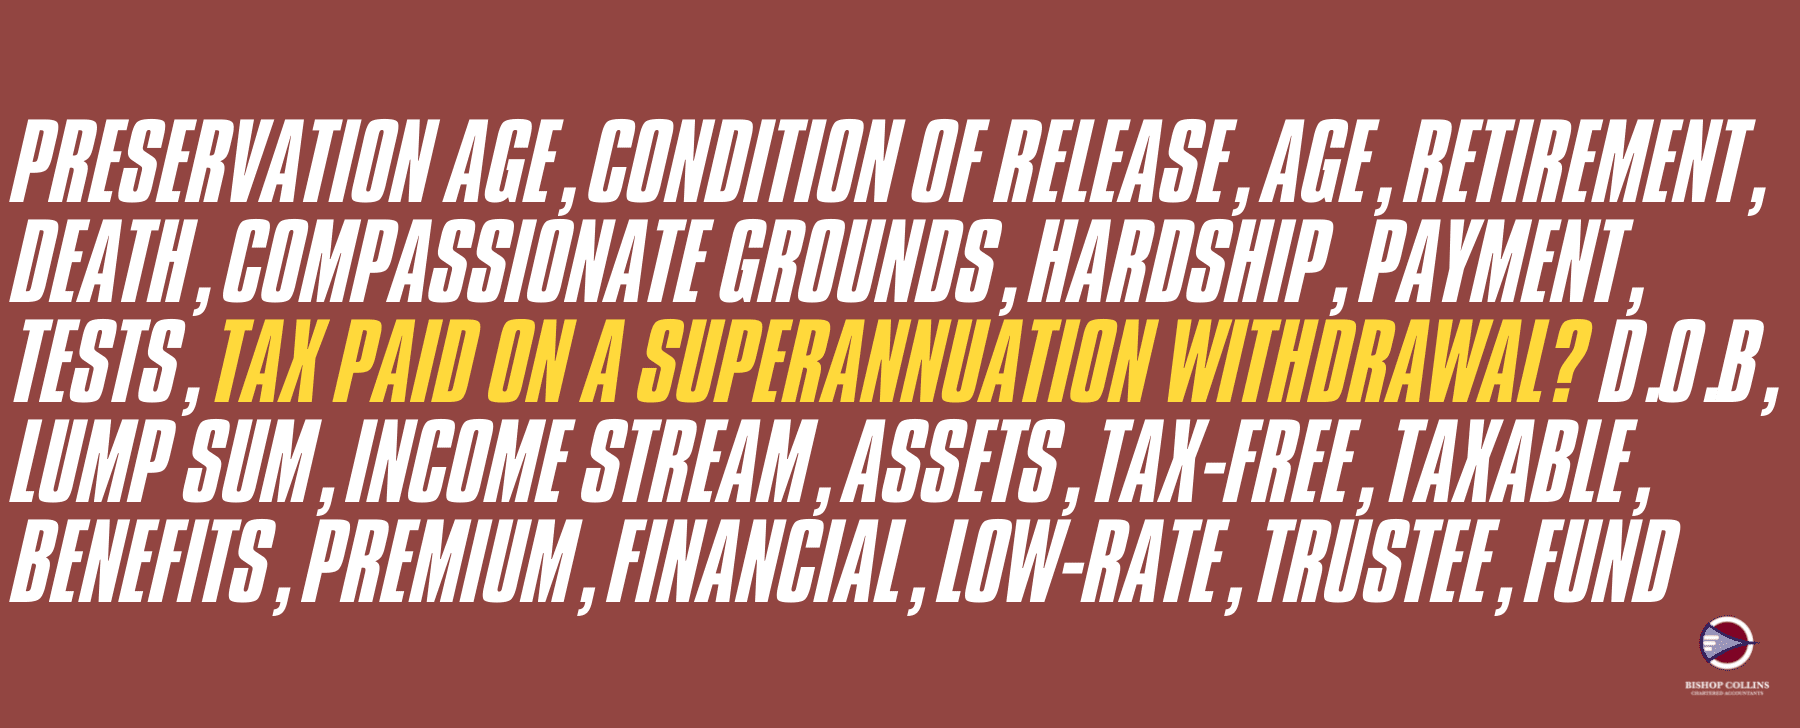 burgundy background with words referring to superannuation withdrawal and the amount of tax you pay for a superannuation withdrawal and the bishop collins accountants logo in the lower right corner of the image